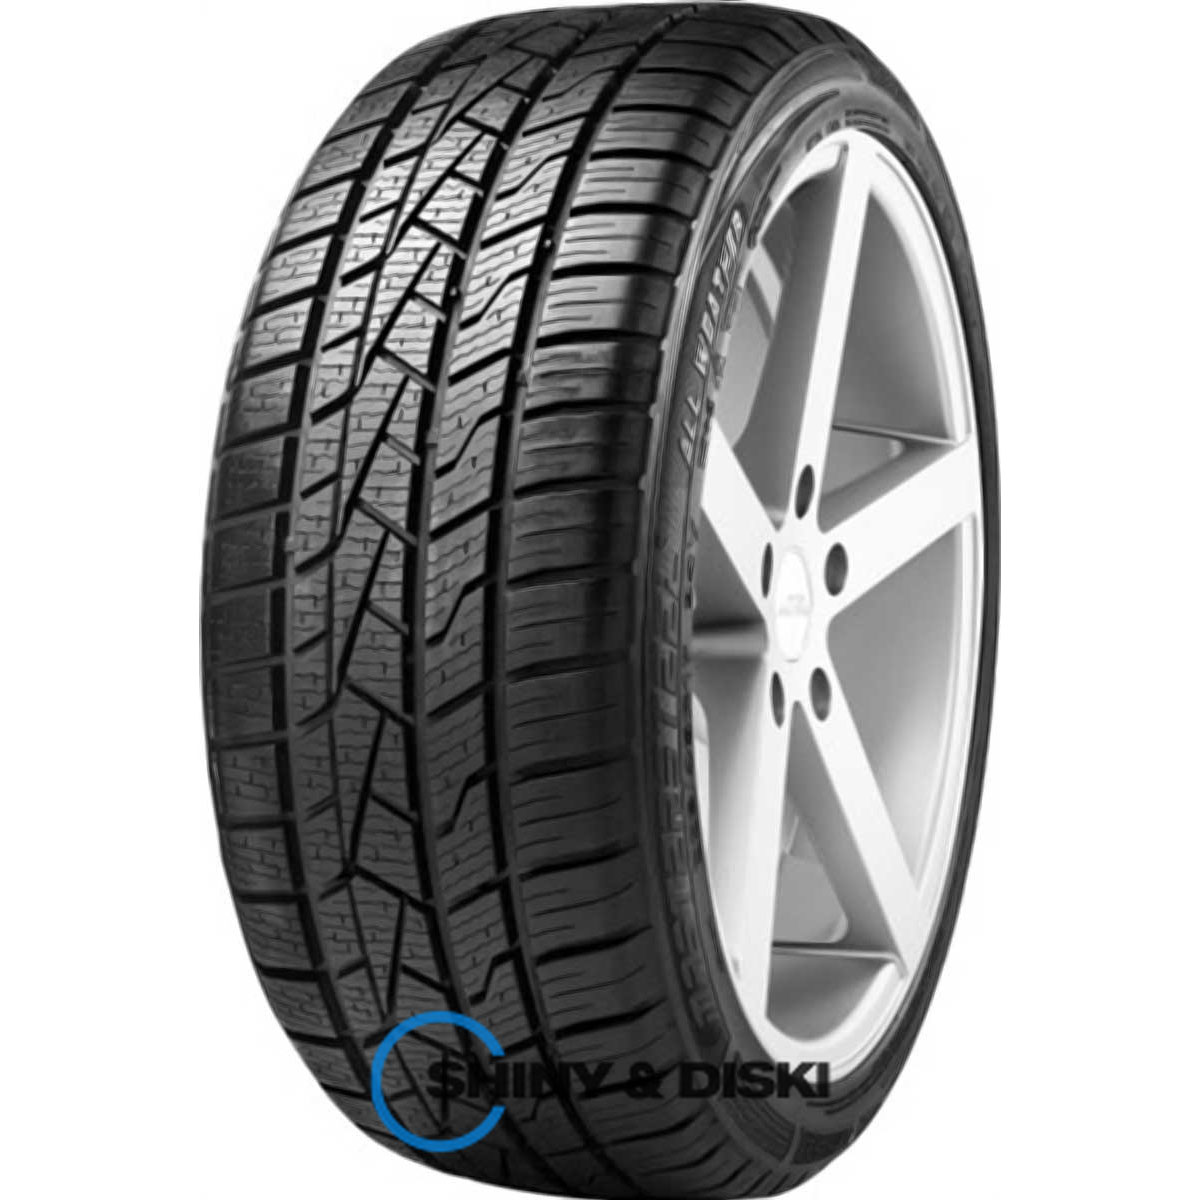 mastersteel all weather 185/55 r14 80t